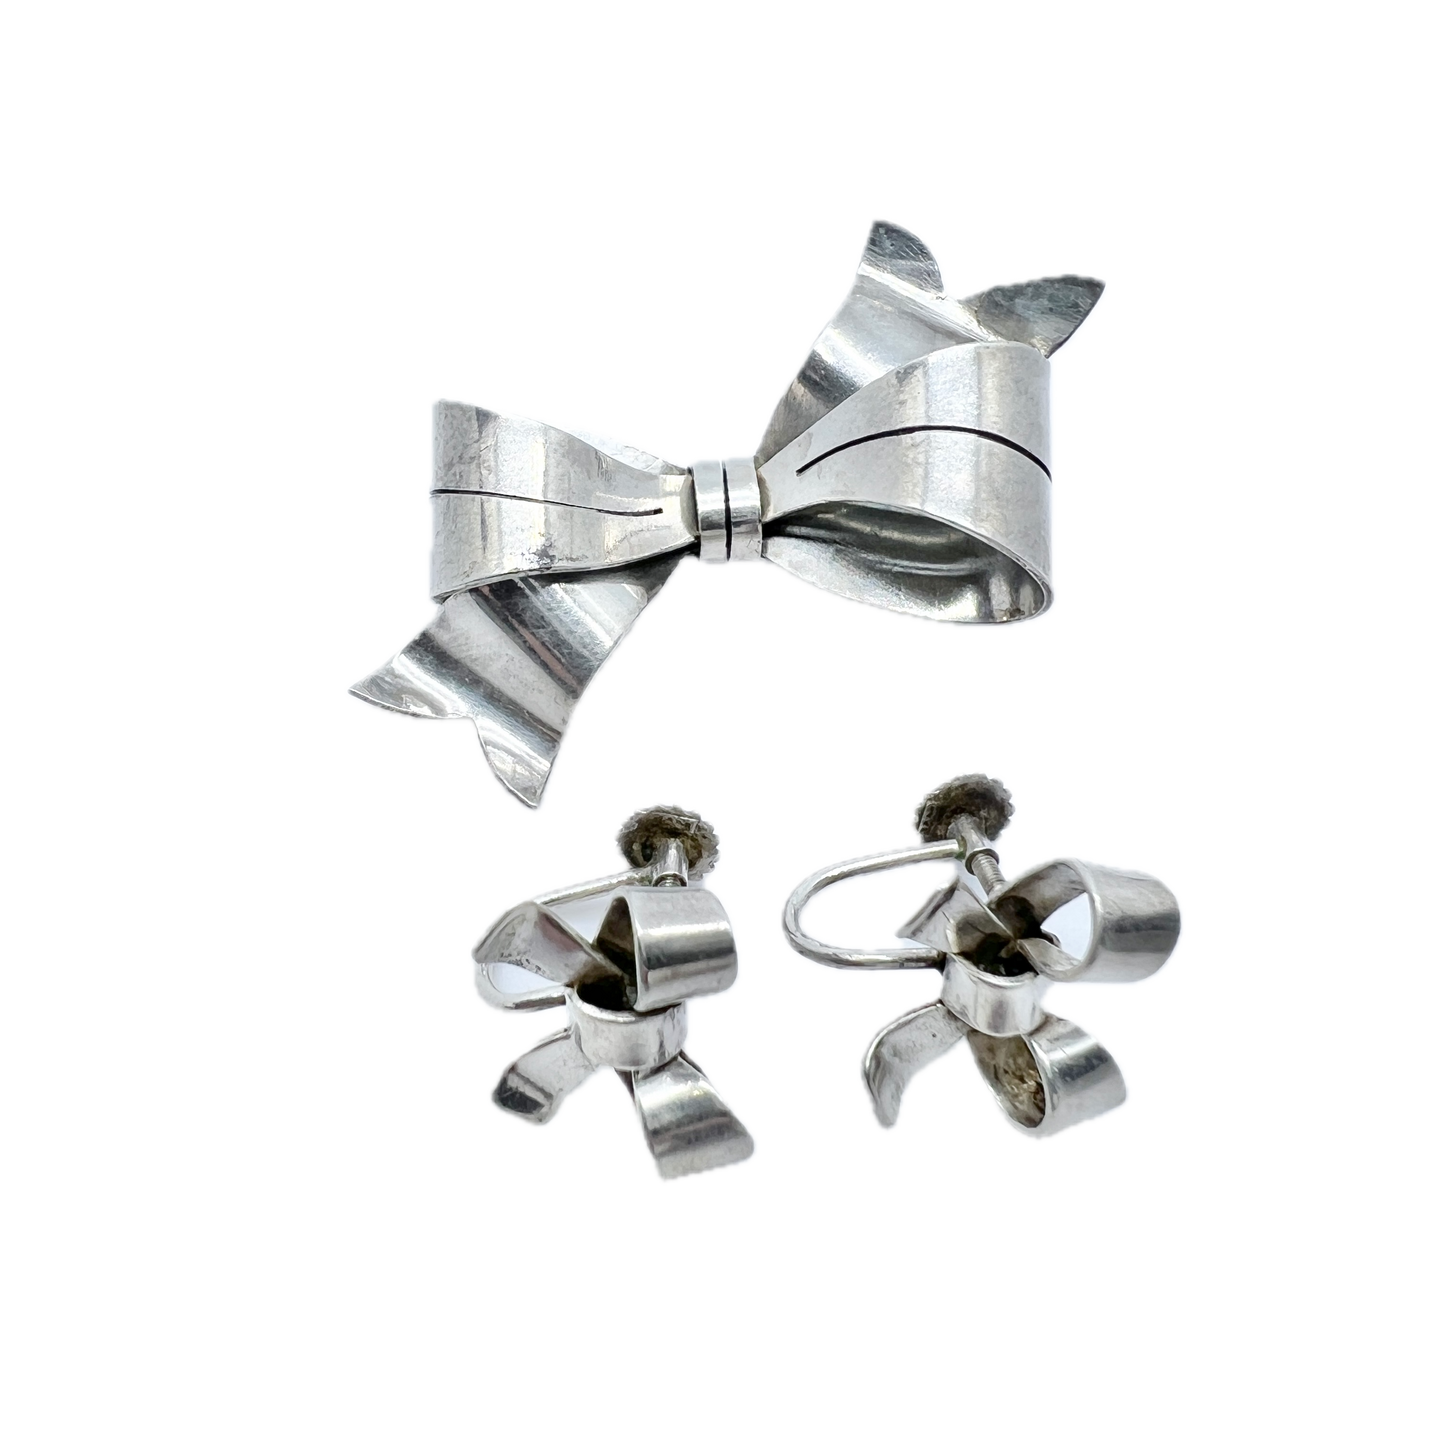 Sweden 1940s. Vintage Solid Silver Ribbon Brooch and Earrings.